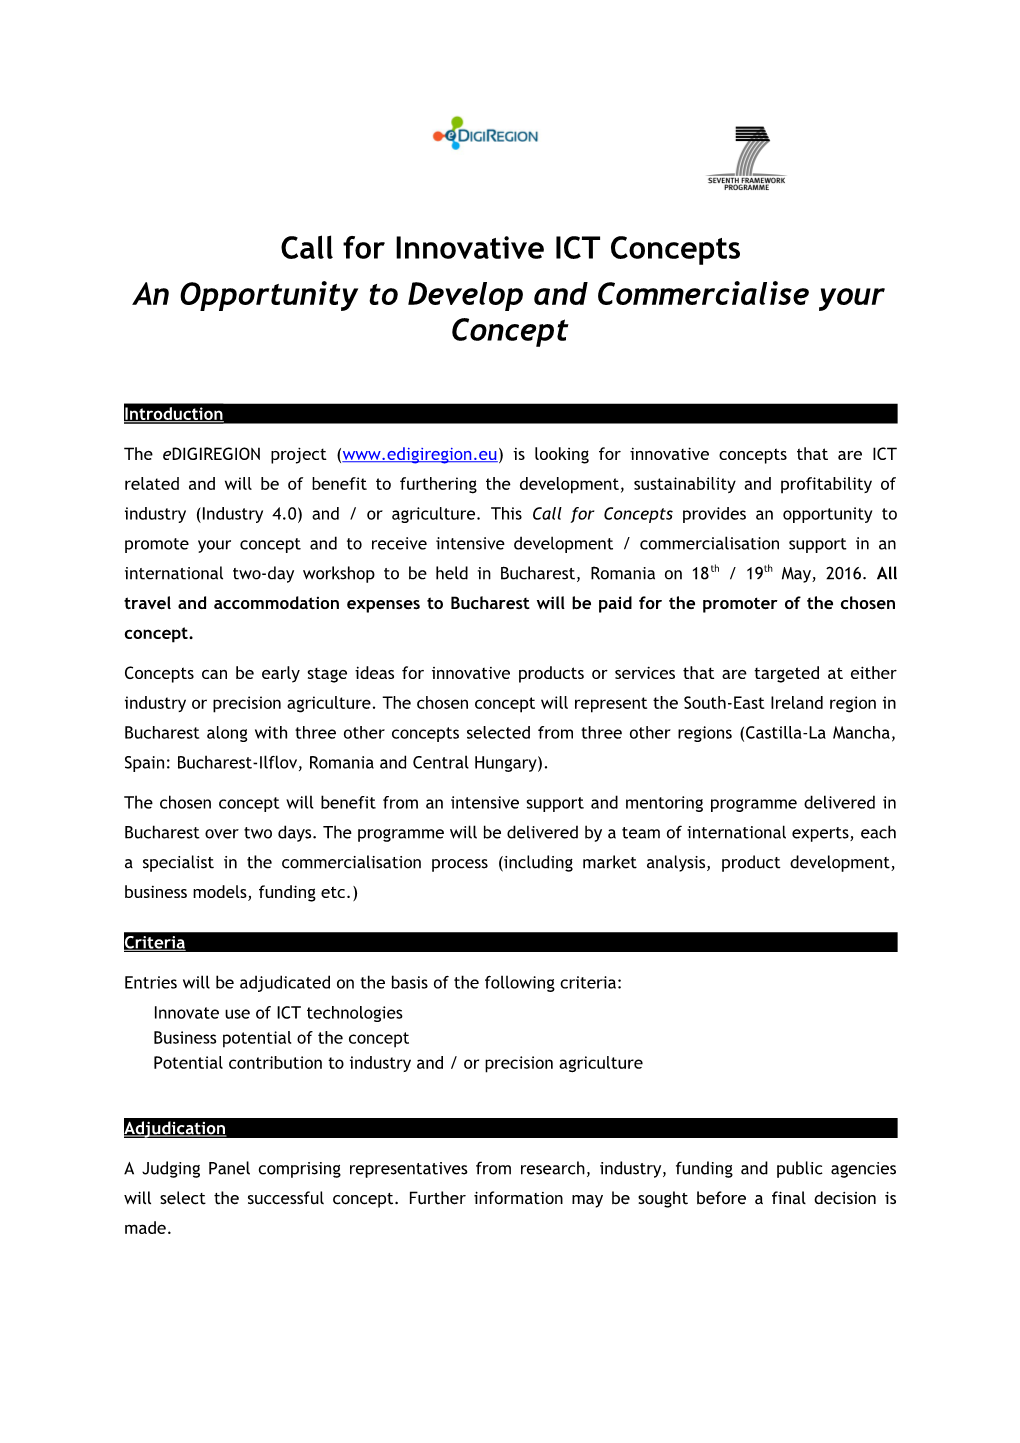 Call for Innovative ICT Concepts